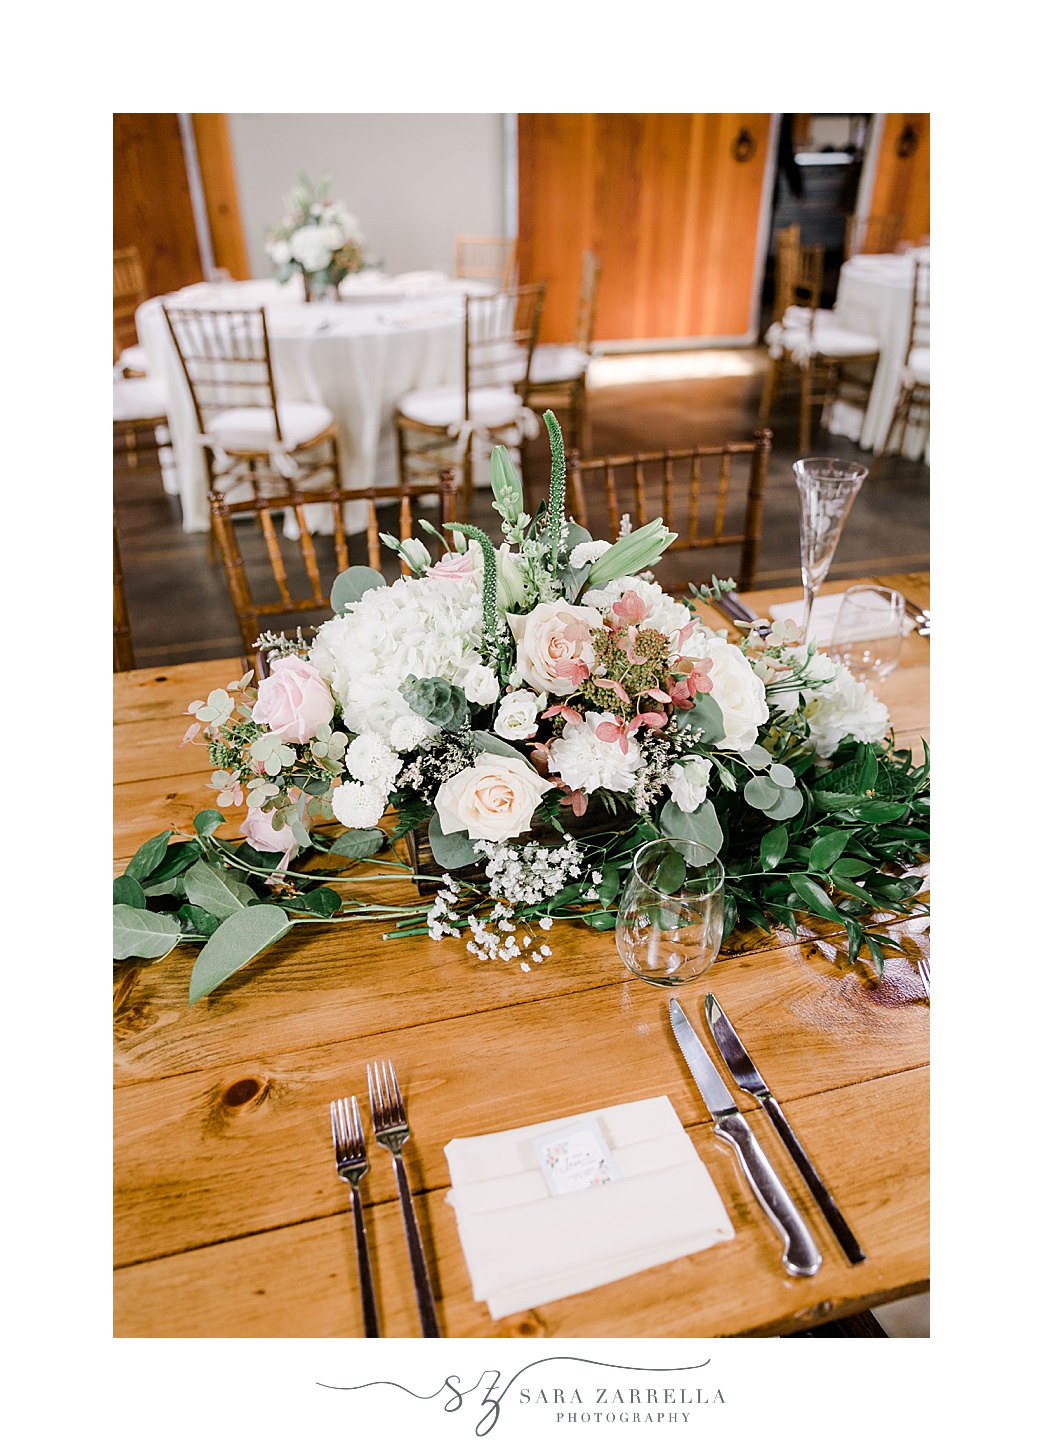 place setting with pink and white floral centerpiece on wooden table